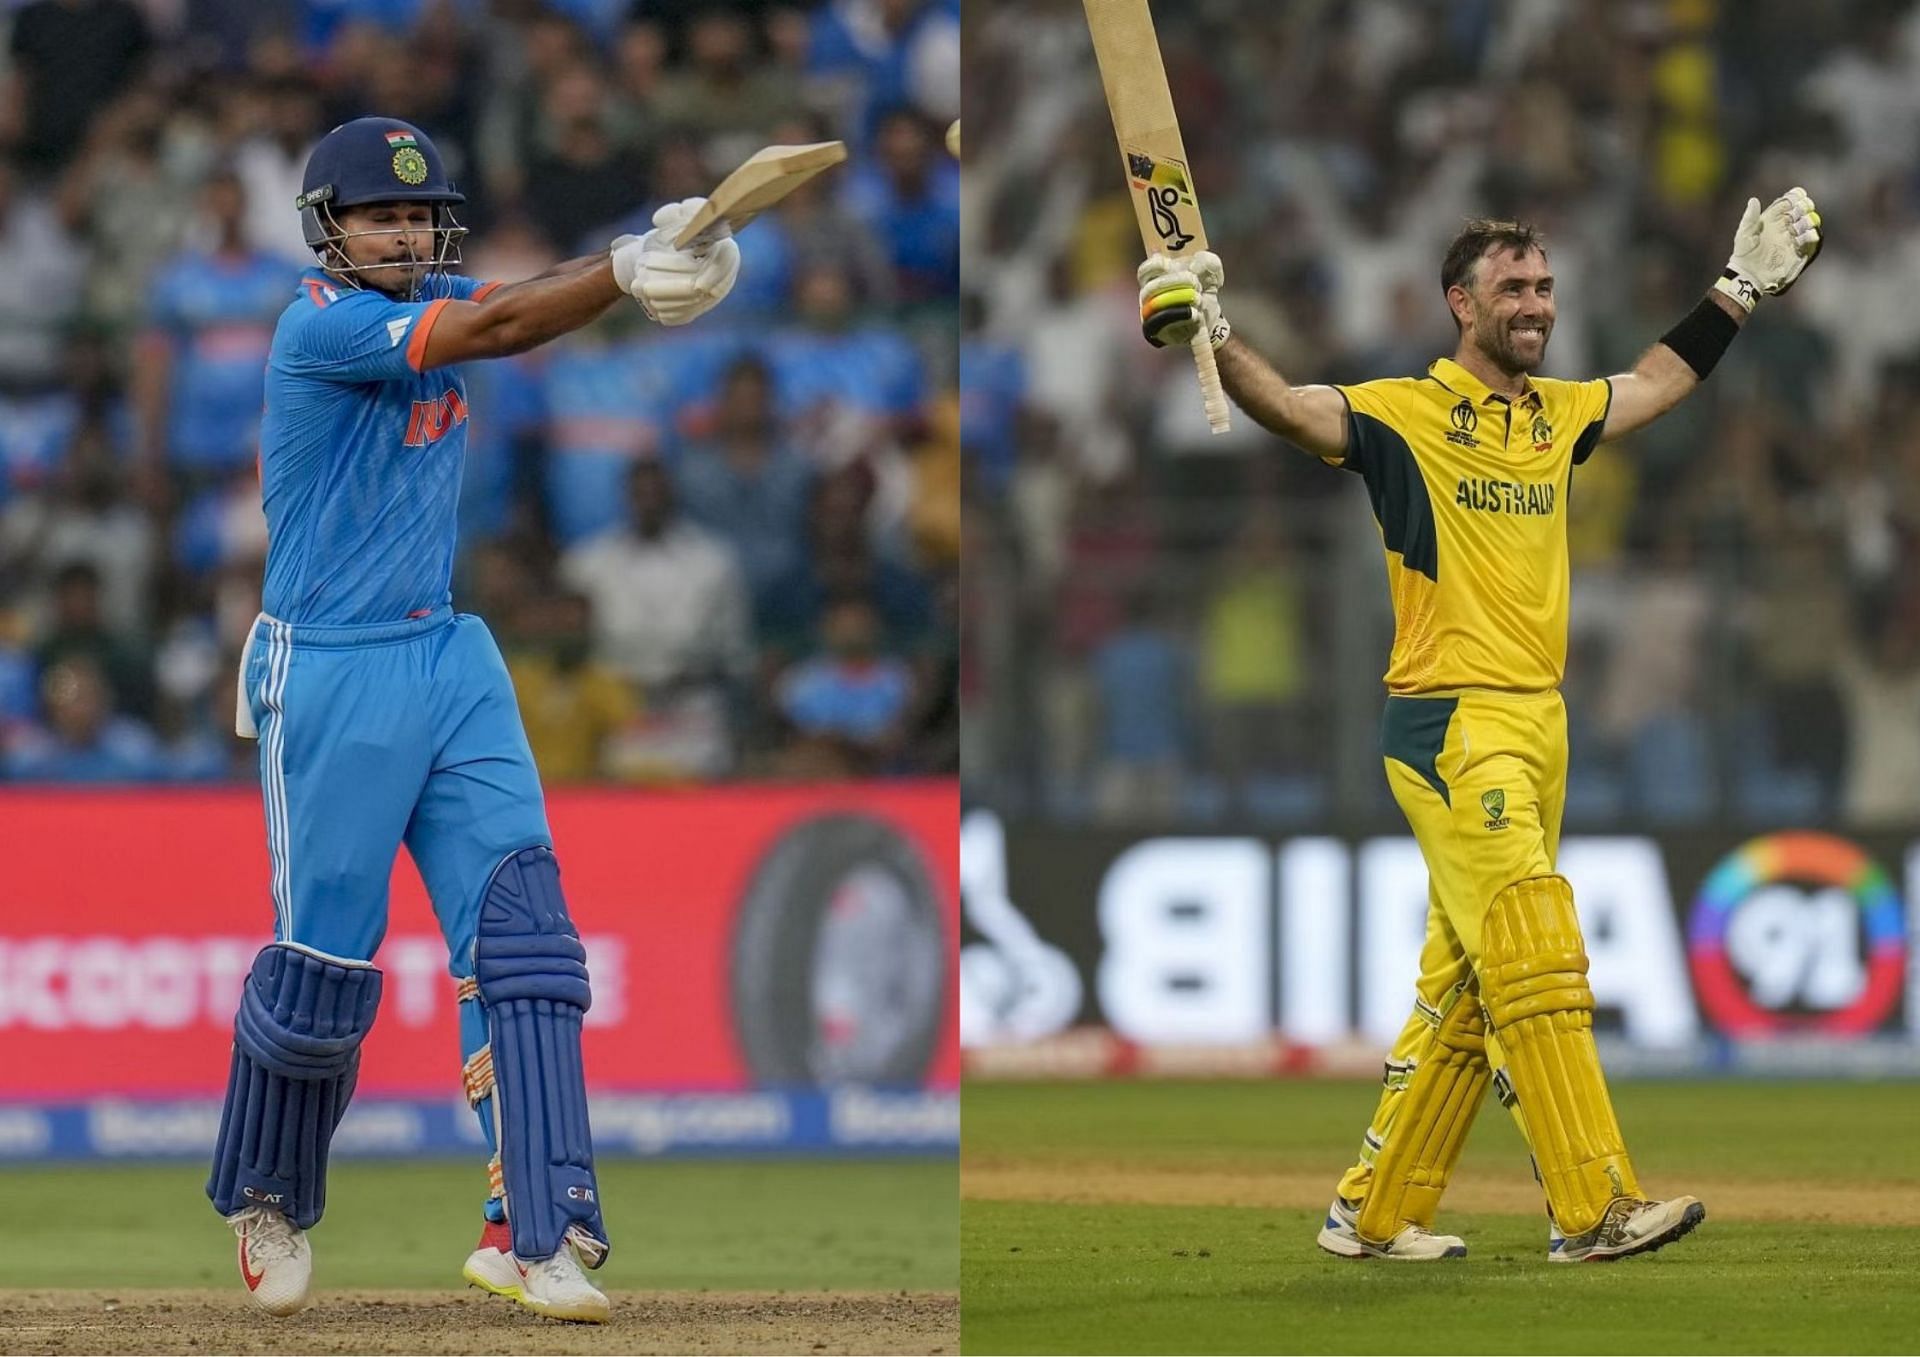 Shreyas Iyer and Glenn Maxwell were spectacular in the week gone by at the 2023 World Cup.